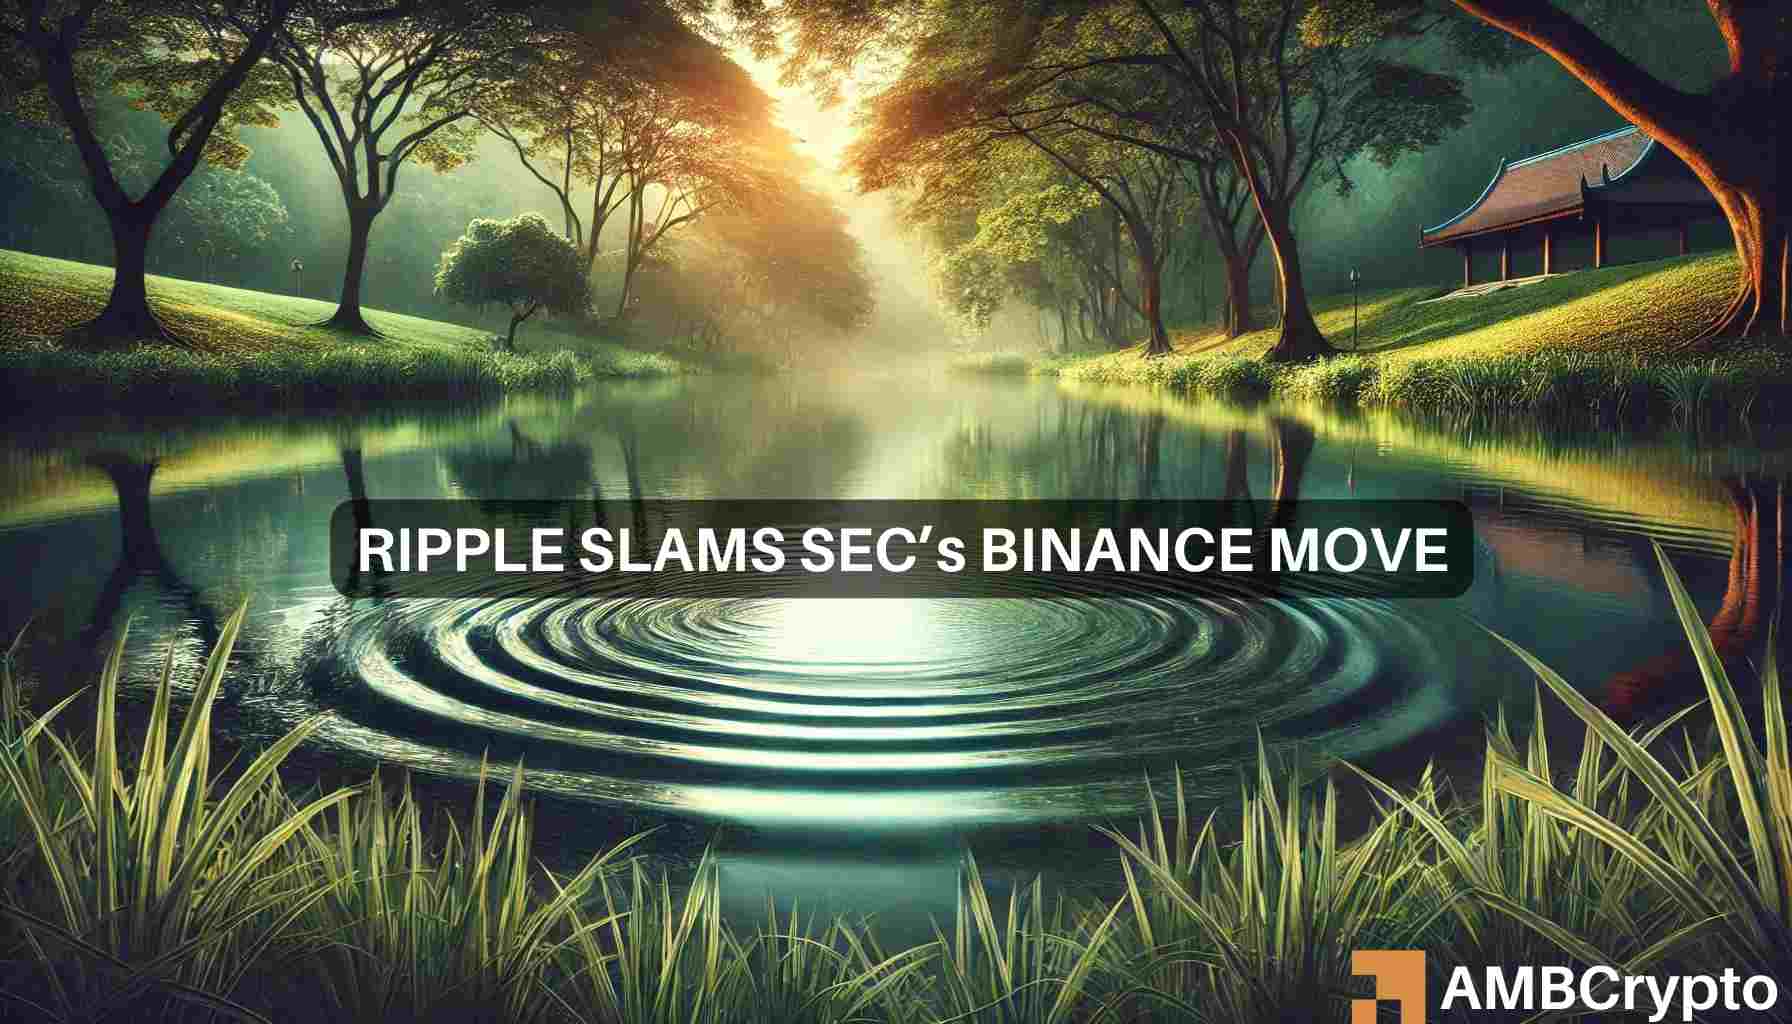 Solana, Cardano 'left out to dry' in SEC-Binance case: Ripple execs